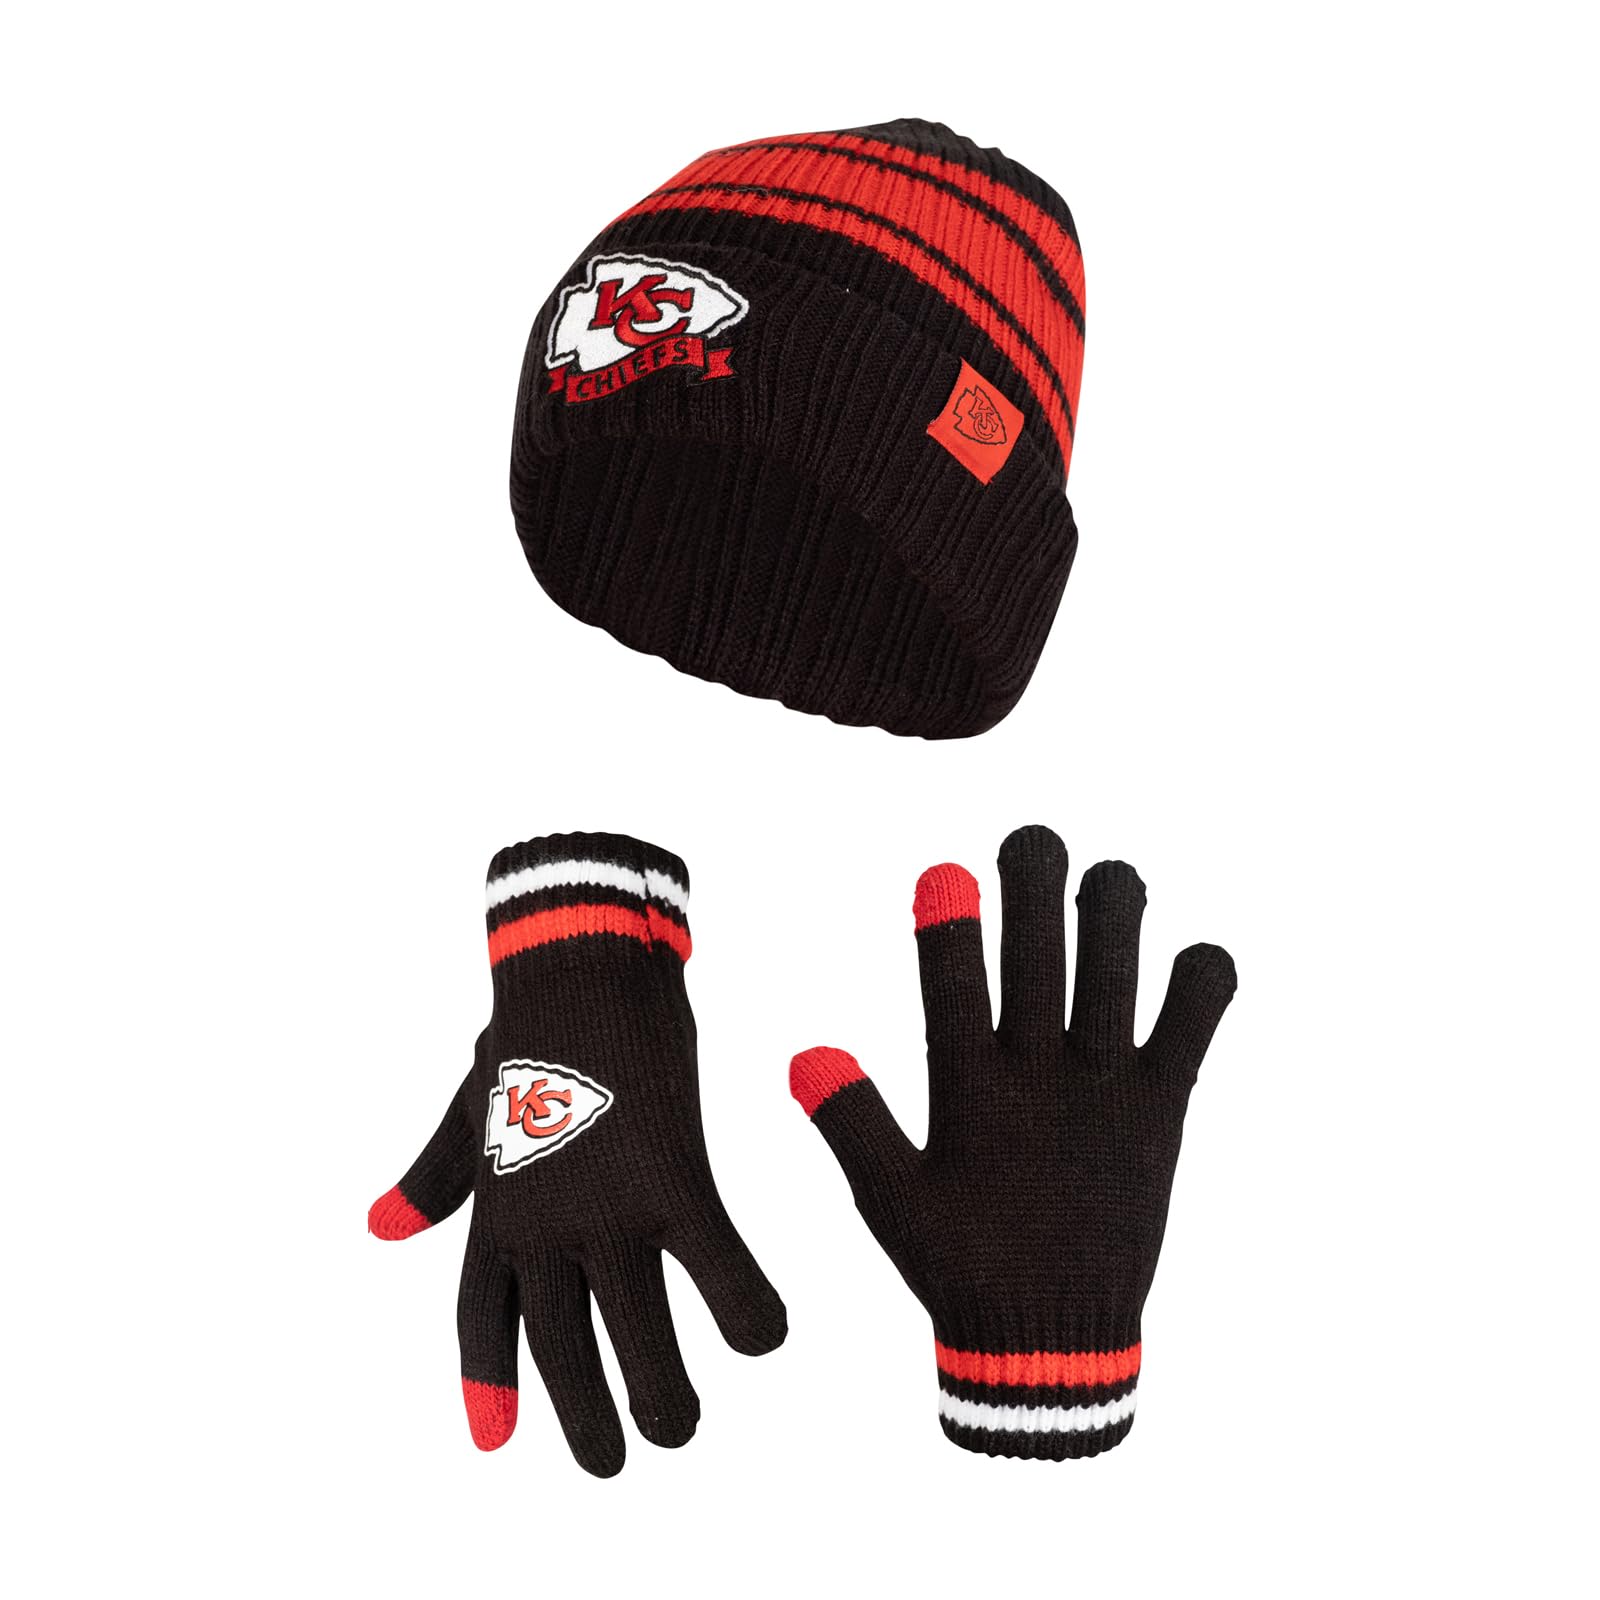 Ultra Game NFL Kansas City Chiefs Youth Super Soft Team Stripe Winter Beanie Knit Hat with Extra Warm Touch Screen Gloves|Kansas City Chiefs